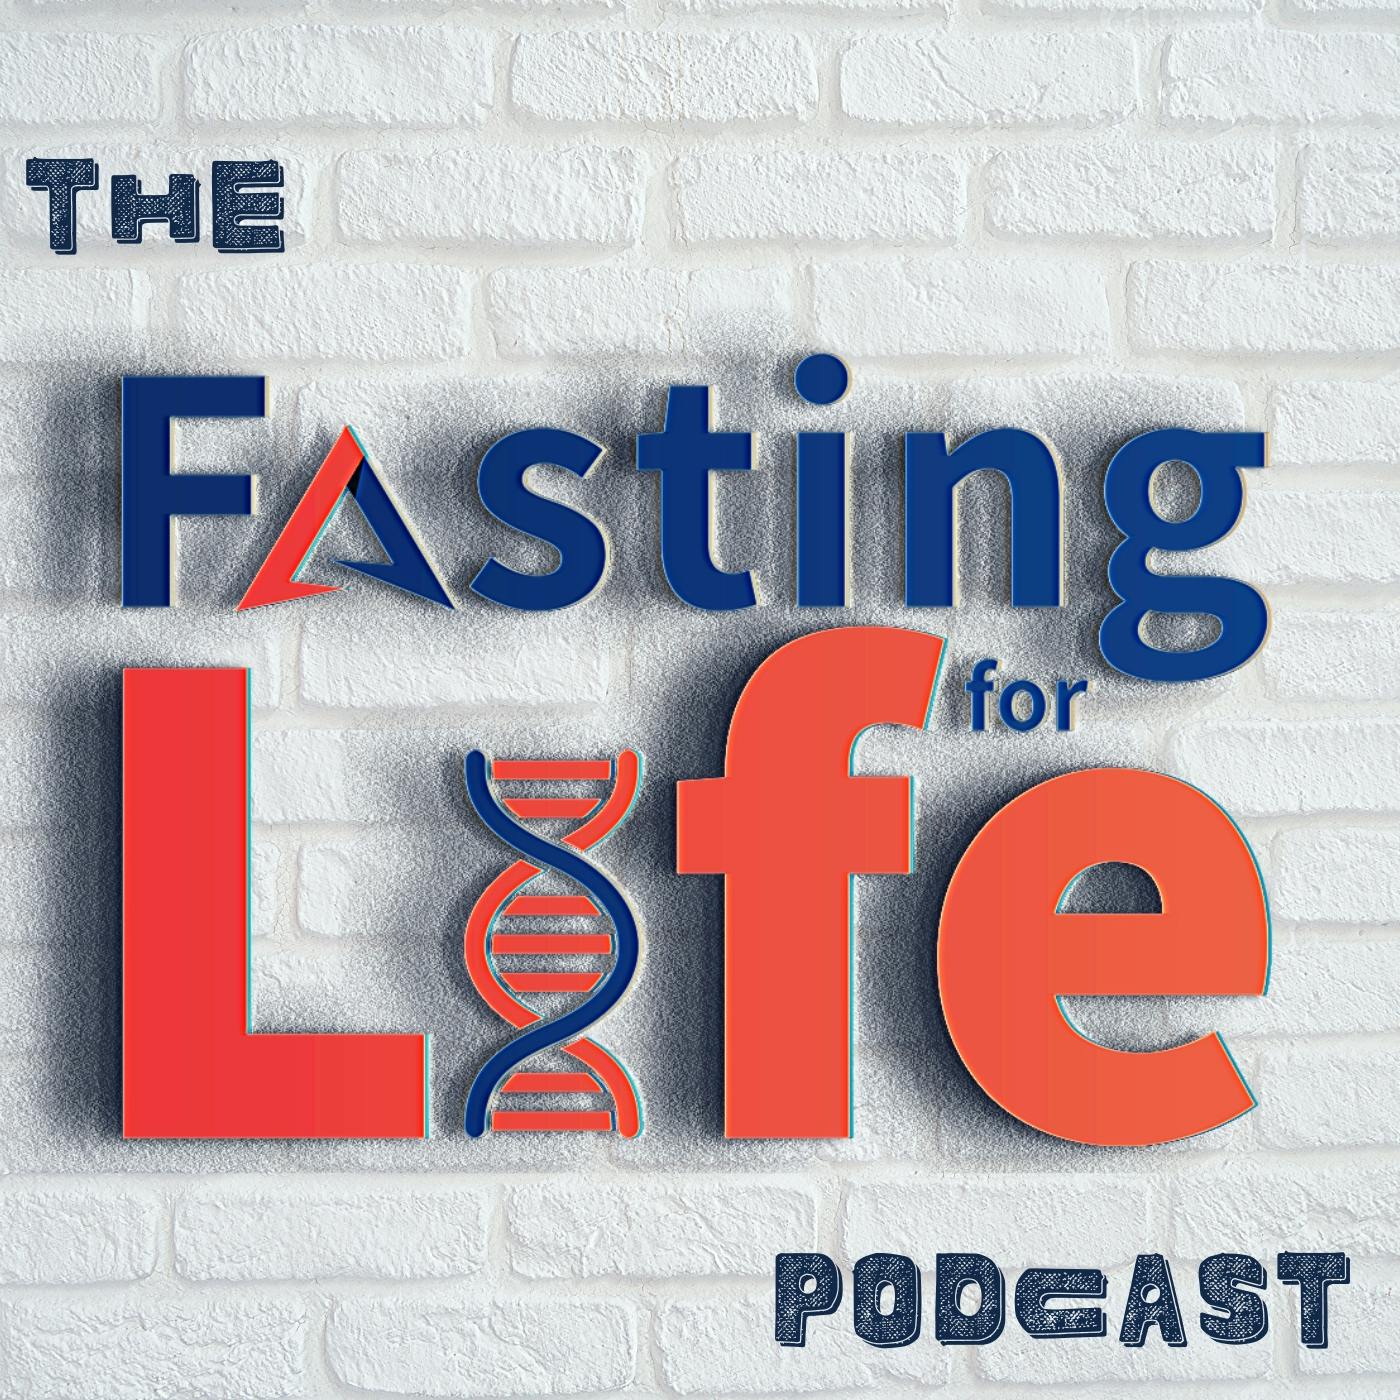 Ep. 172 - Blueprint to Fasting For Fat Loss, fasting for beginners, & what is fast cycling? | How to ramp up for longer fasts, reverse insulin resistance, & break your fast | CGM data to optimize your